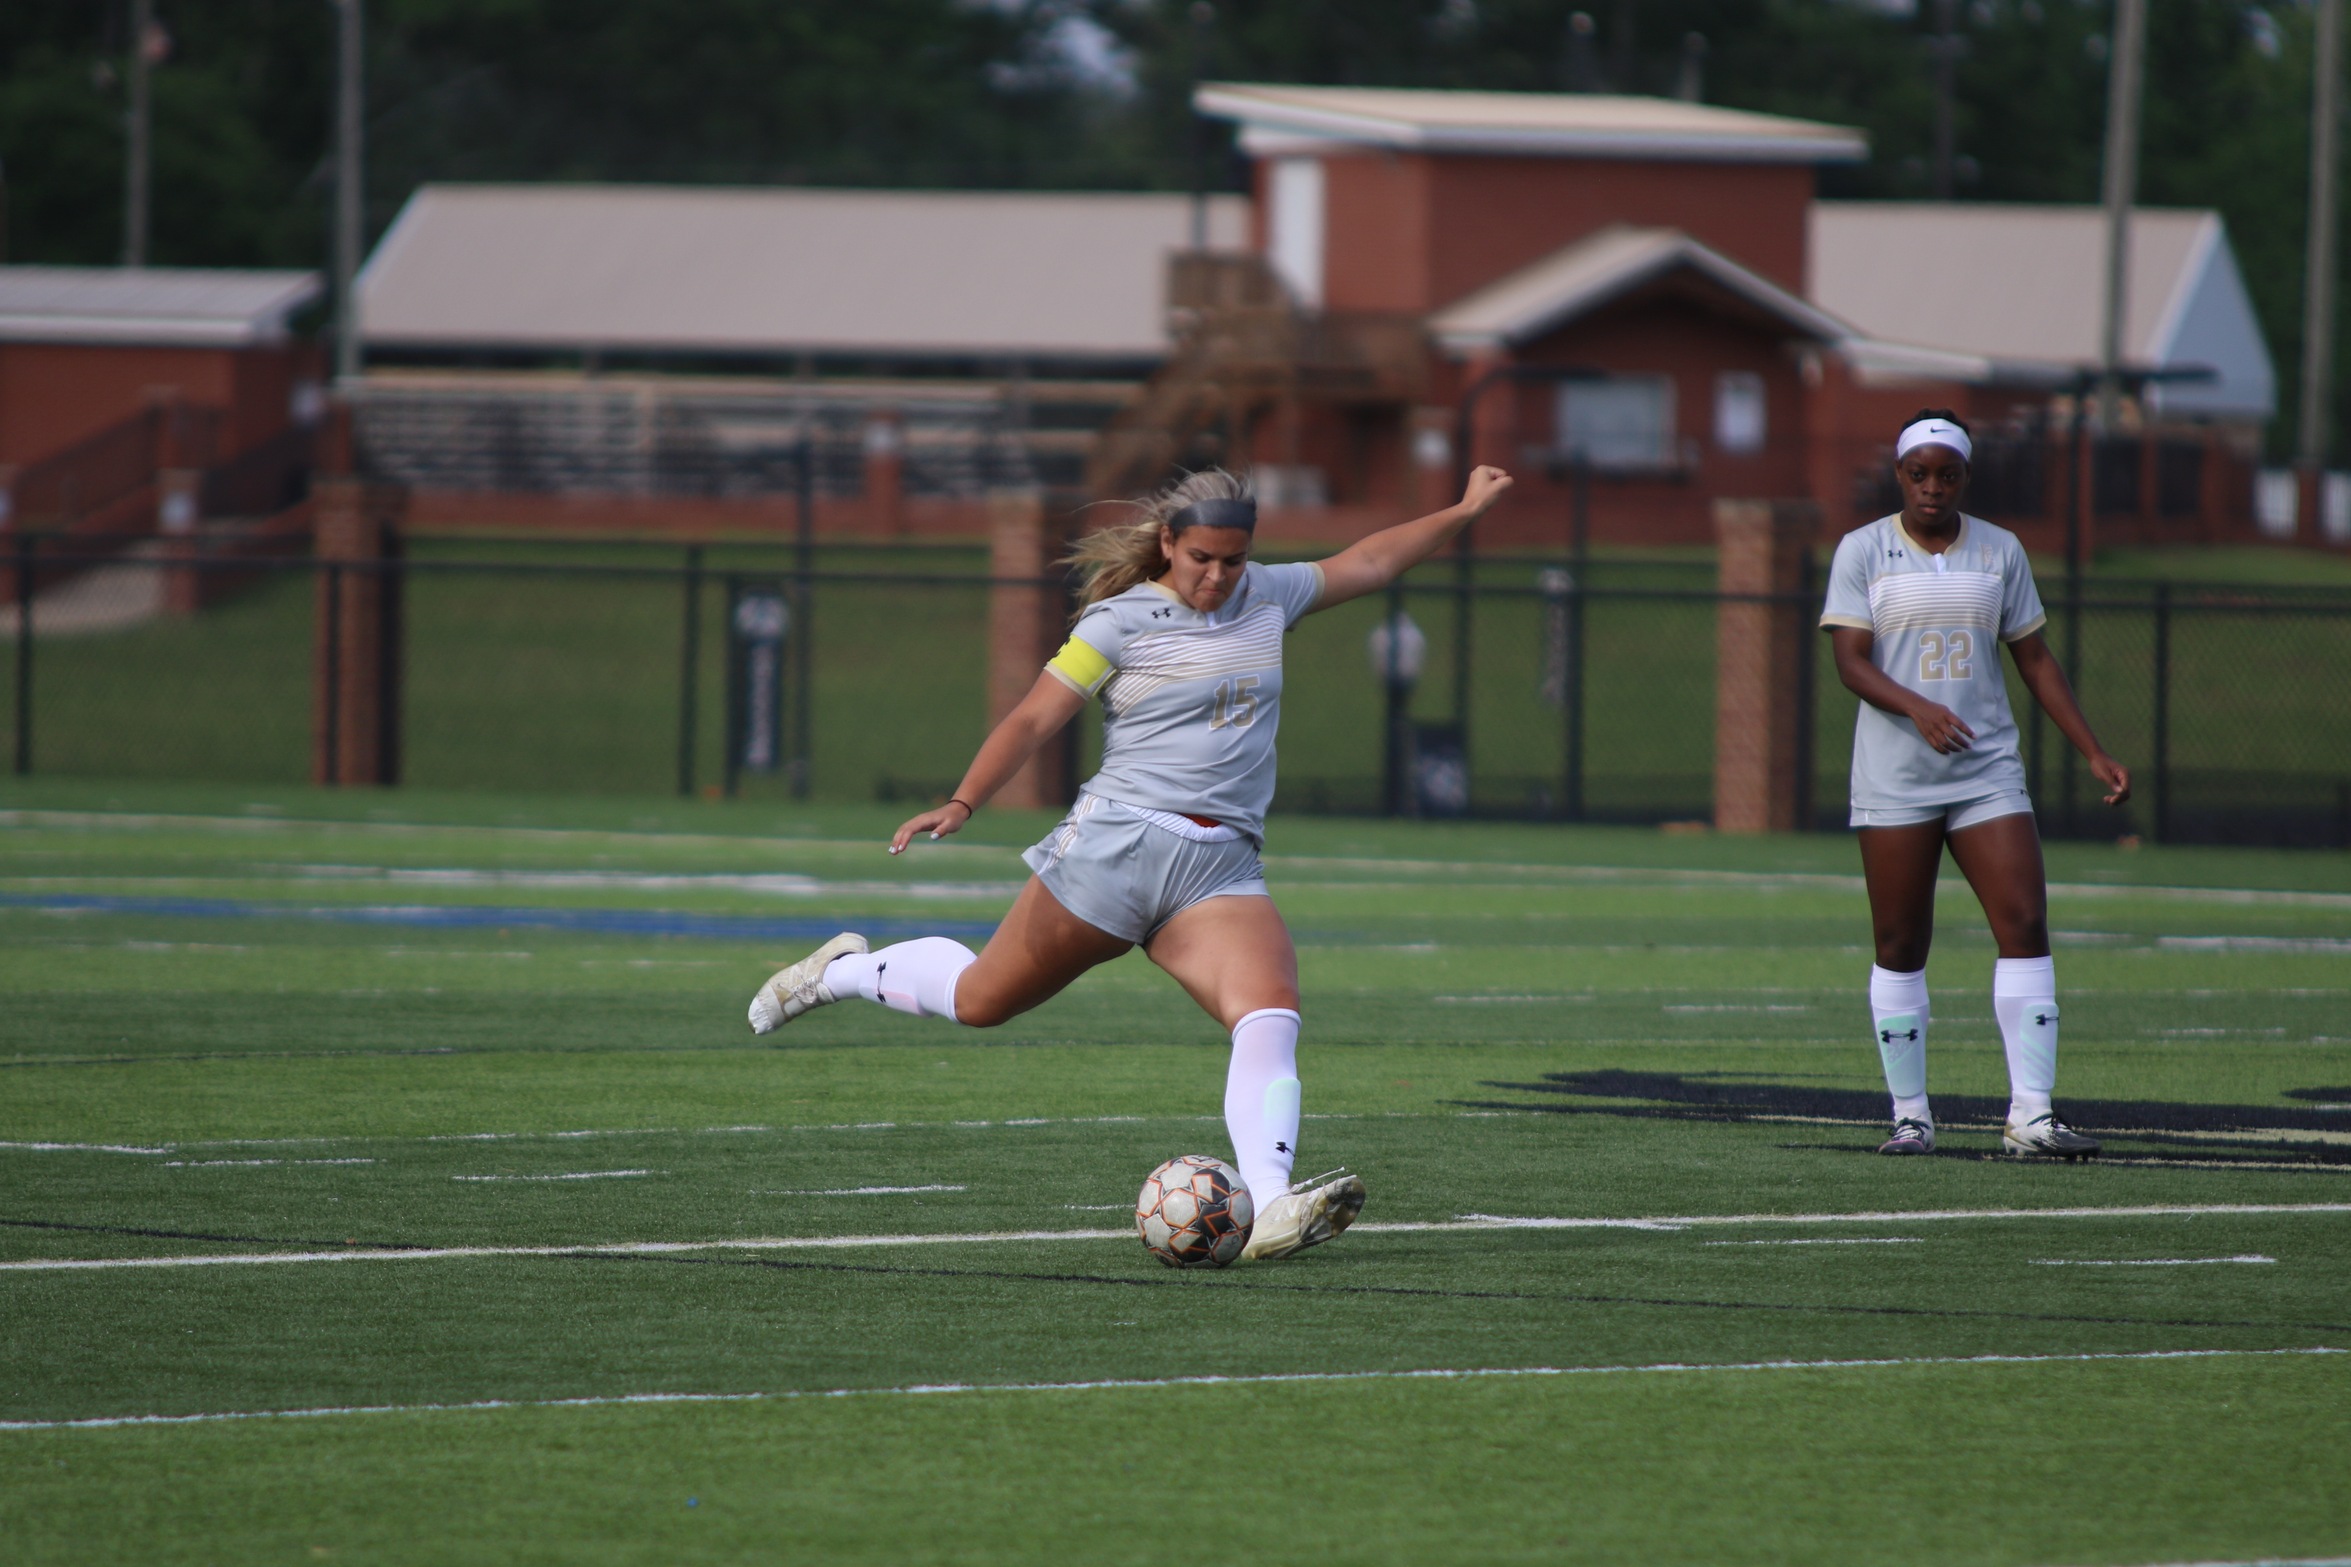 Late goal lifts ECCC to 1-0 win over ICC